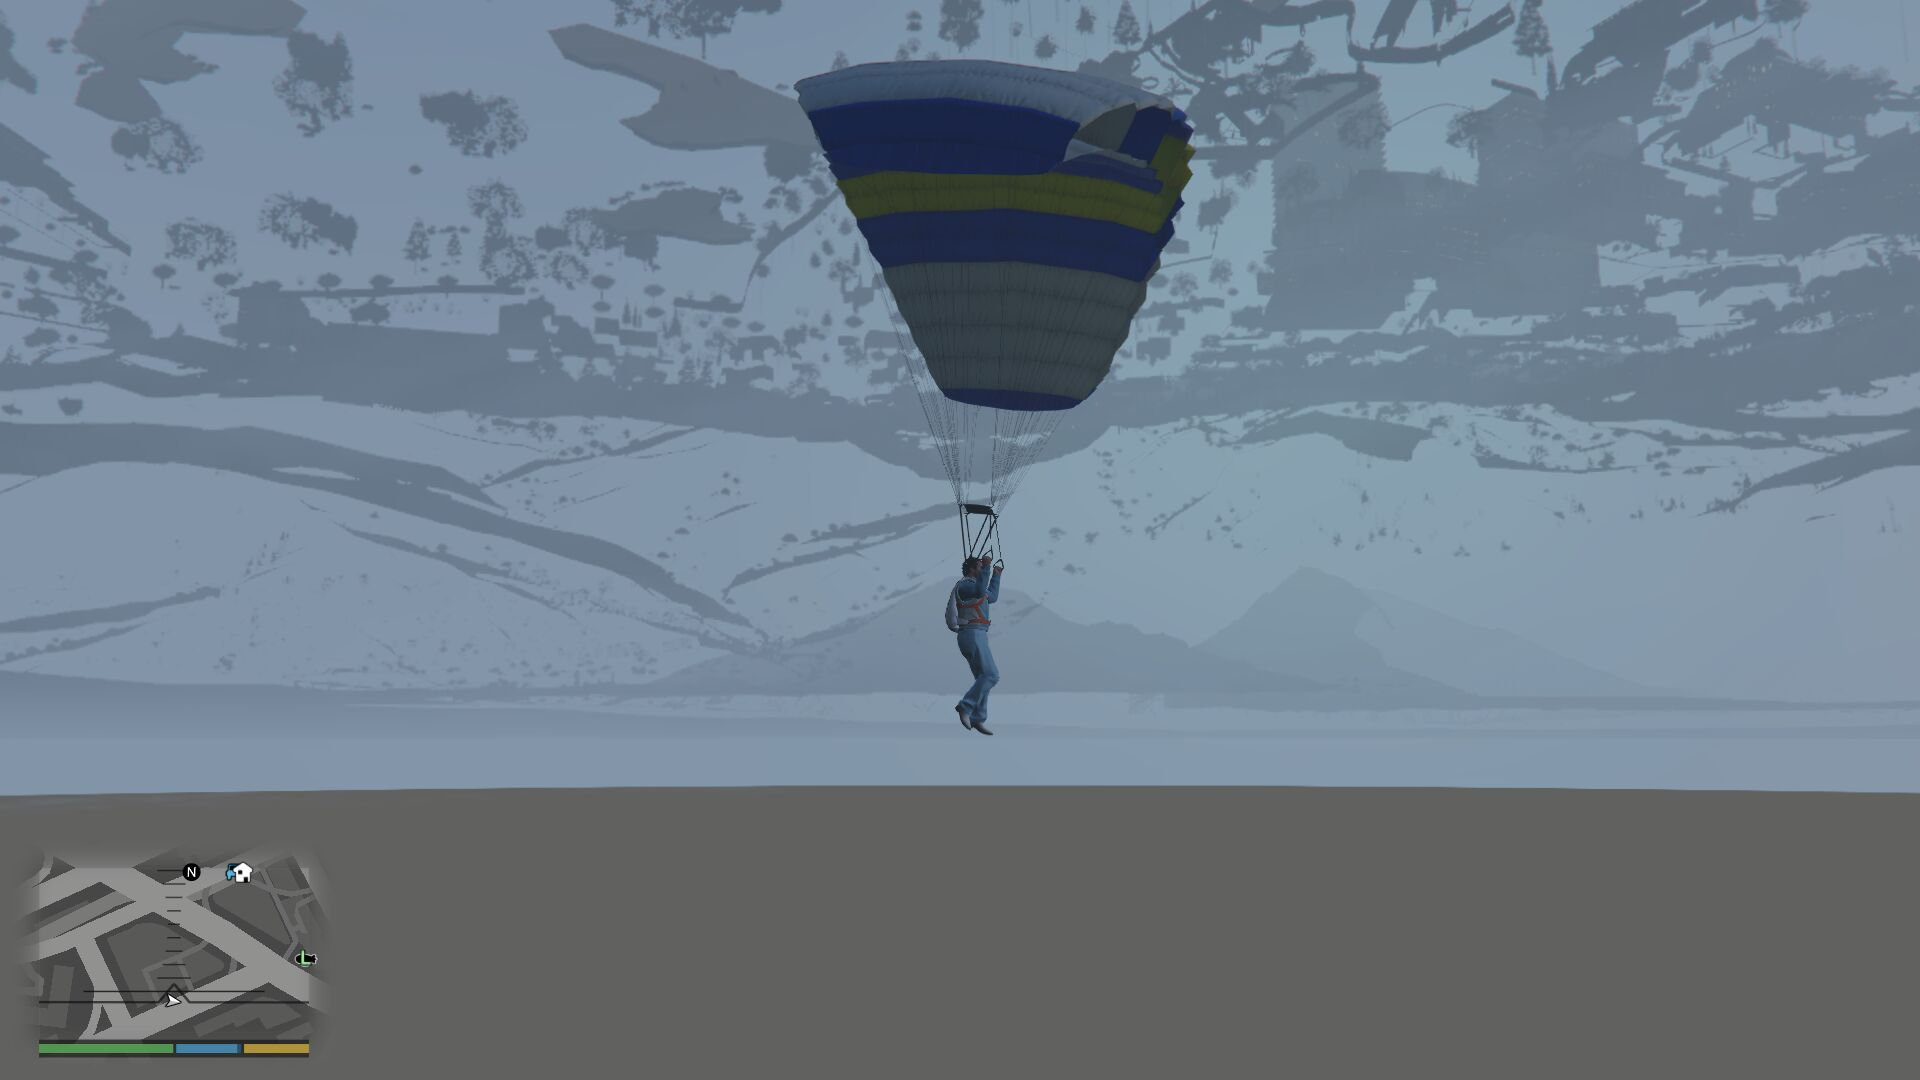 how do you land a parachute in gta v without slamming into the ground?